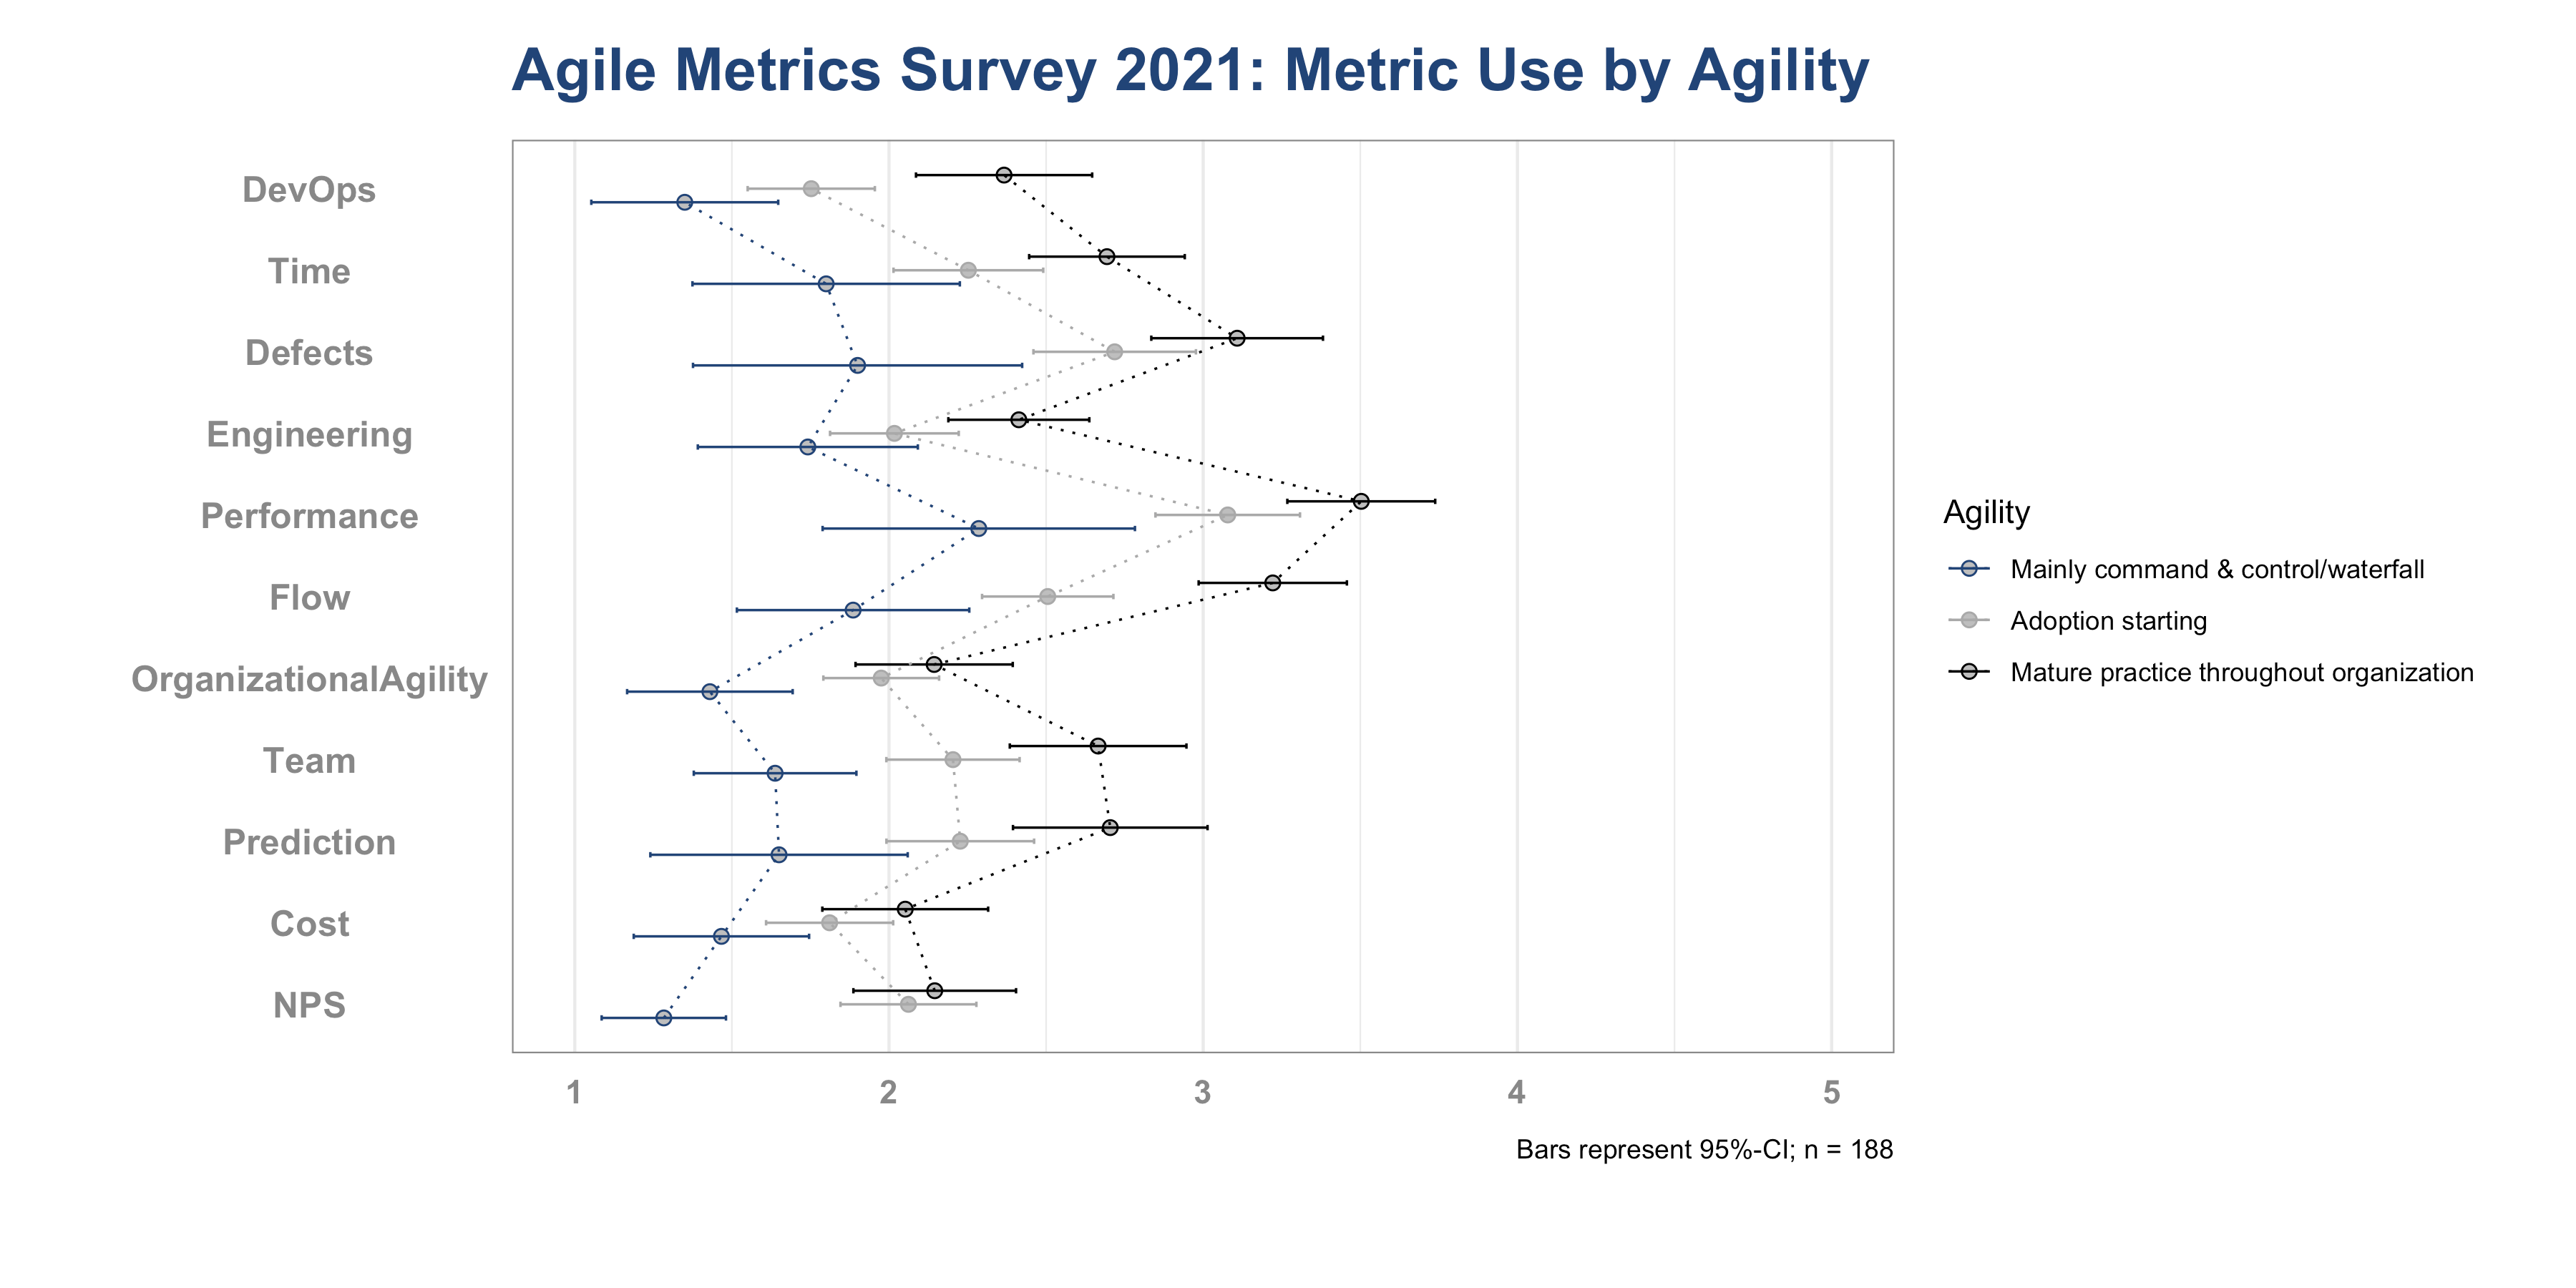 Agile Metrics Survey 2021 by Berlin Product People GmbH: Metric Use by Agility Level for the Software and IT Industry